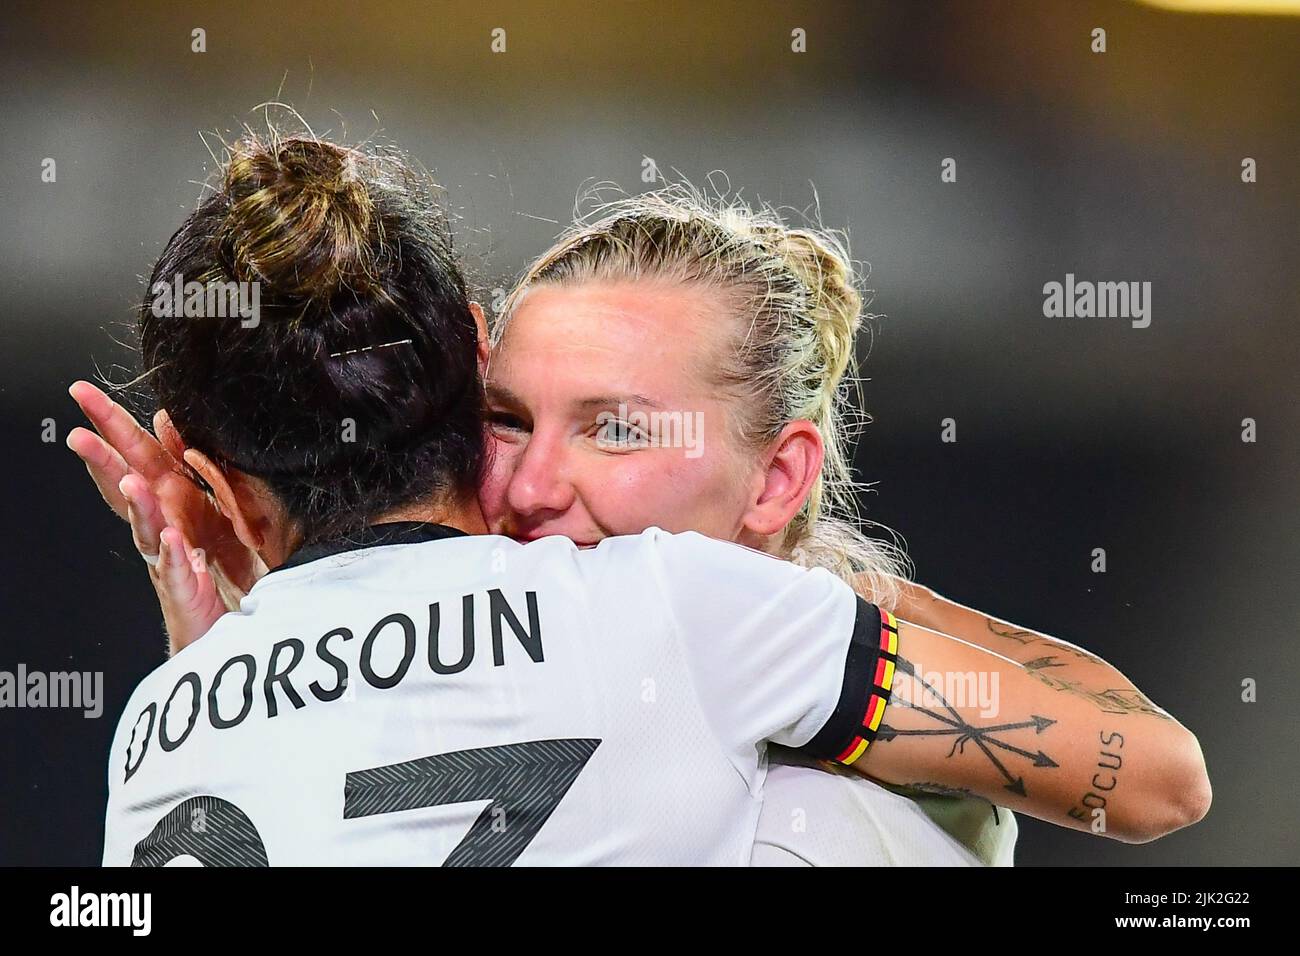 Milton Keynes, UK. 27th July, 2022. Sara Doorsoun-Khajeh (23 Germany) Alexandra Popp (11 Germany) celebrate the win over France during the UEFA Womens Euro 2022 Semi final football match between Germany v France at Milton Keynes Stadium-England. (Foto: Kevin Hodgson/Sports Press Photo/C - ONE HOUR DEADLINE - ONLY ACTIVATE FTP IF IMAGES LESS THAN ONE HOUR OLD - Alamy) Credit: SPP Sport Press Photo. /Alamy Live News Stock Photo